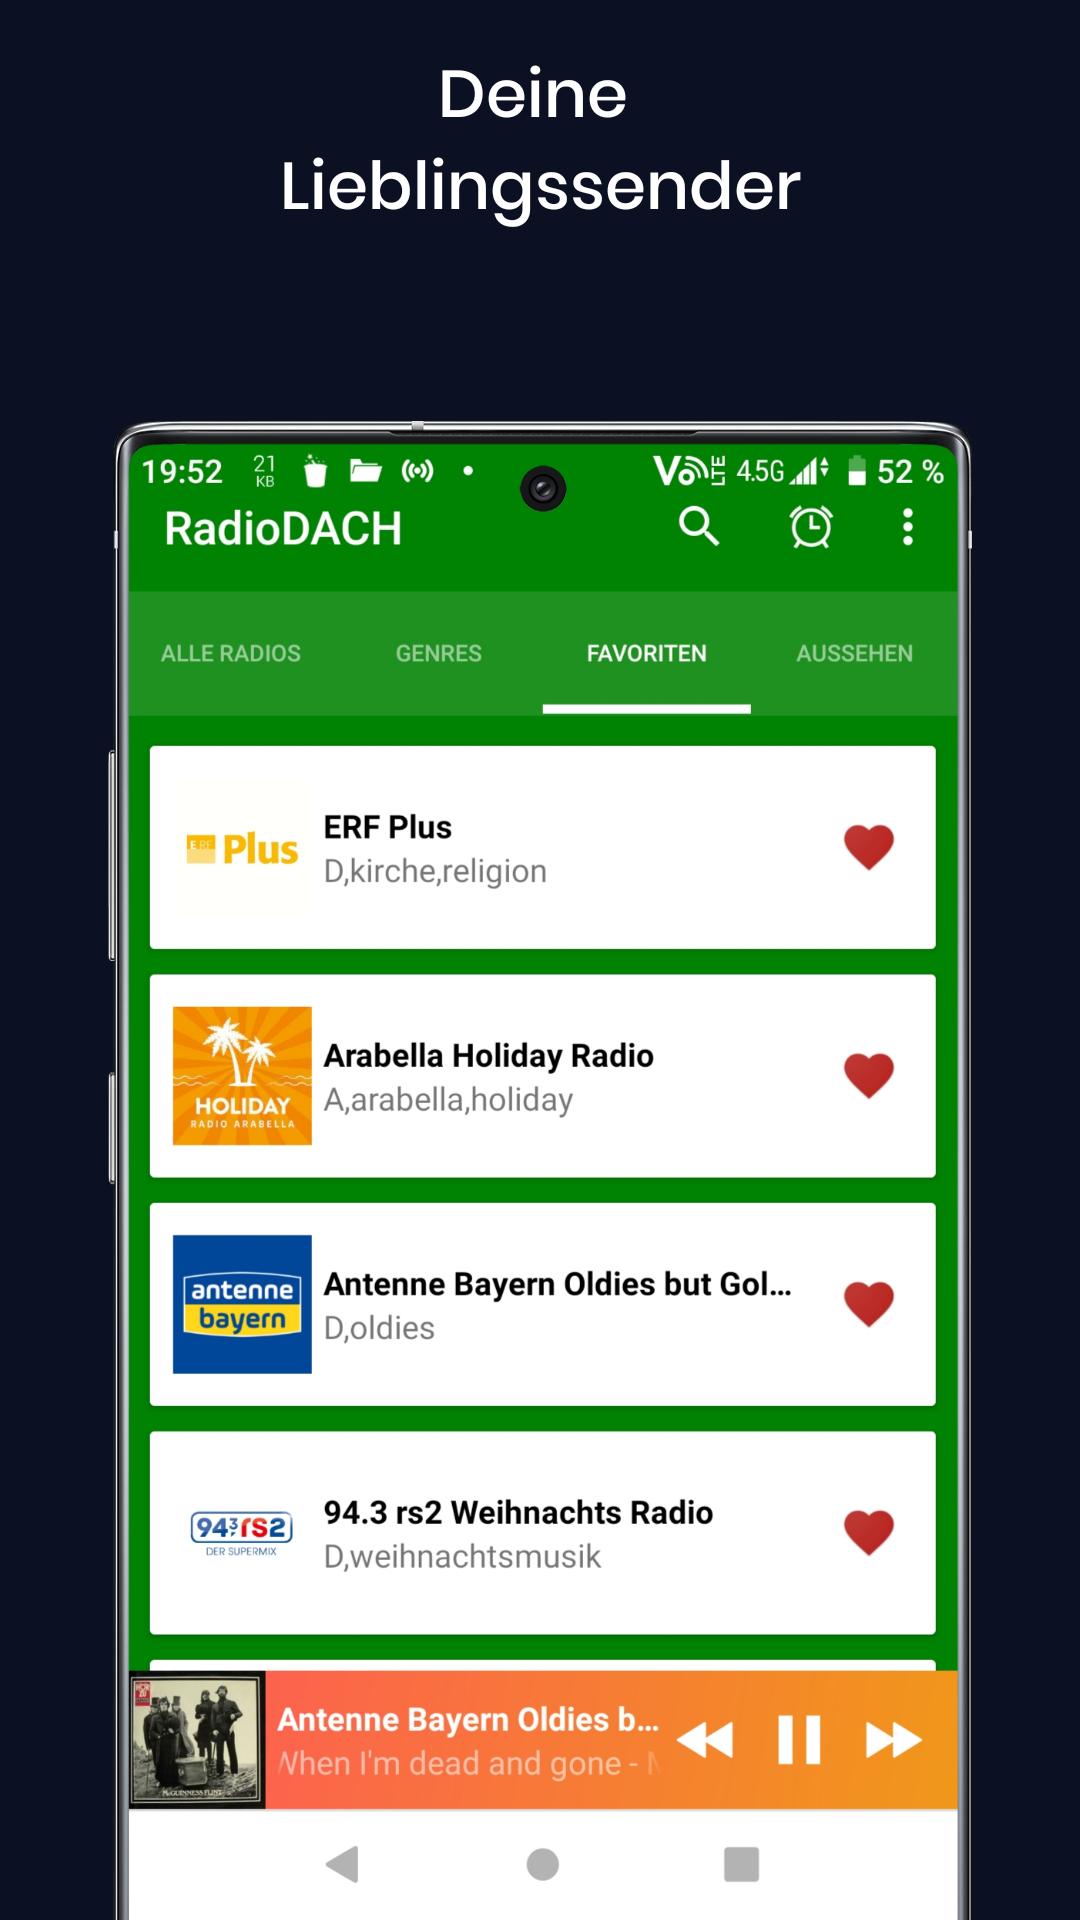 Radio DACH for Android - APK Download